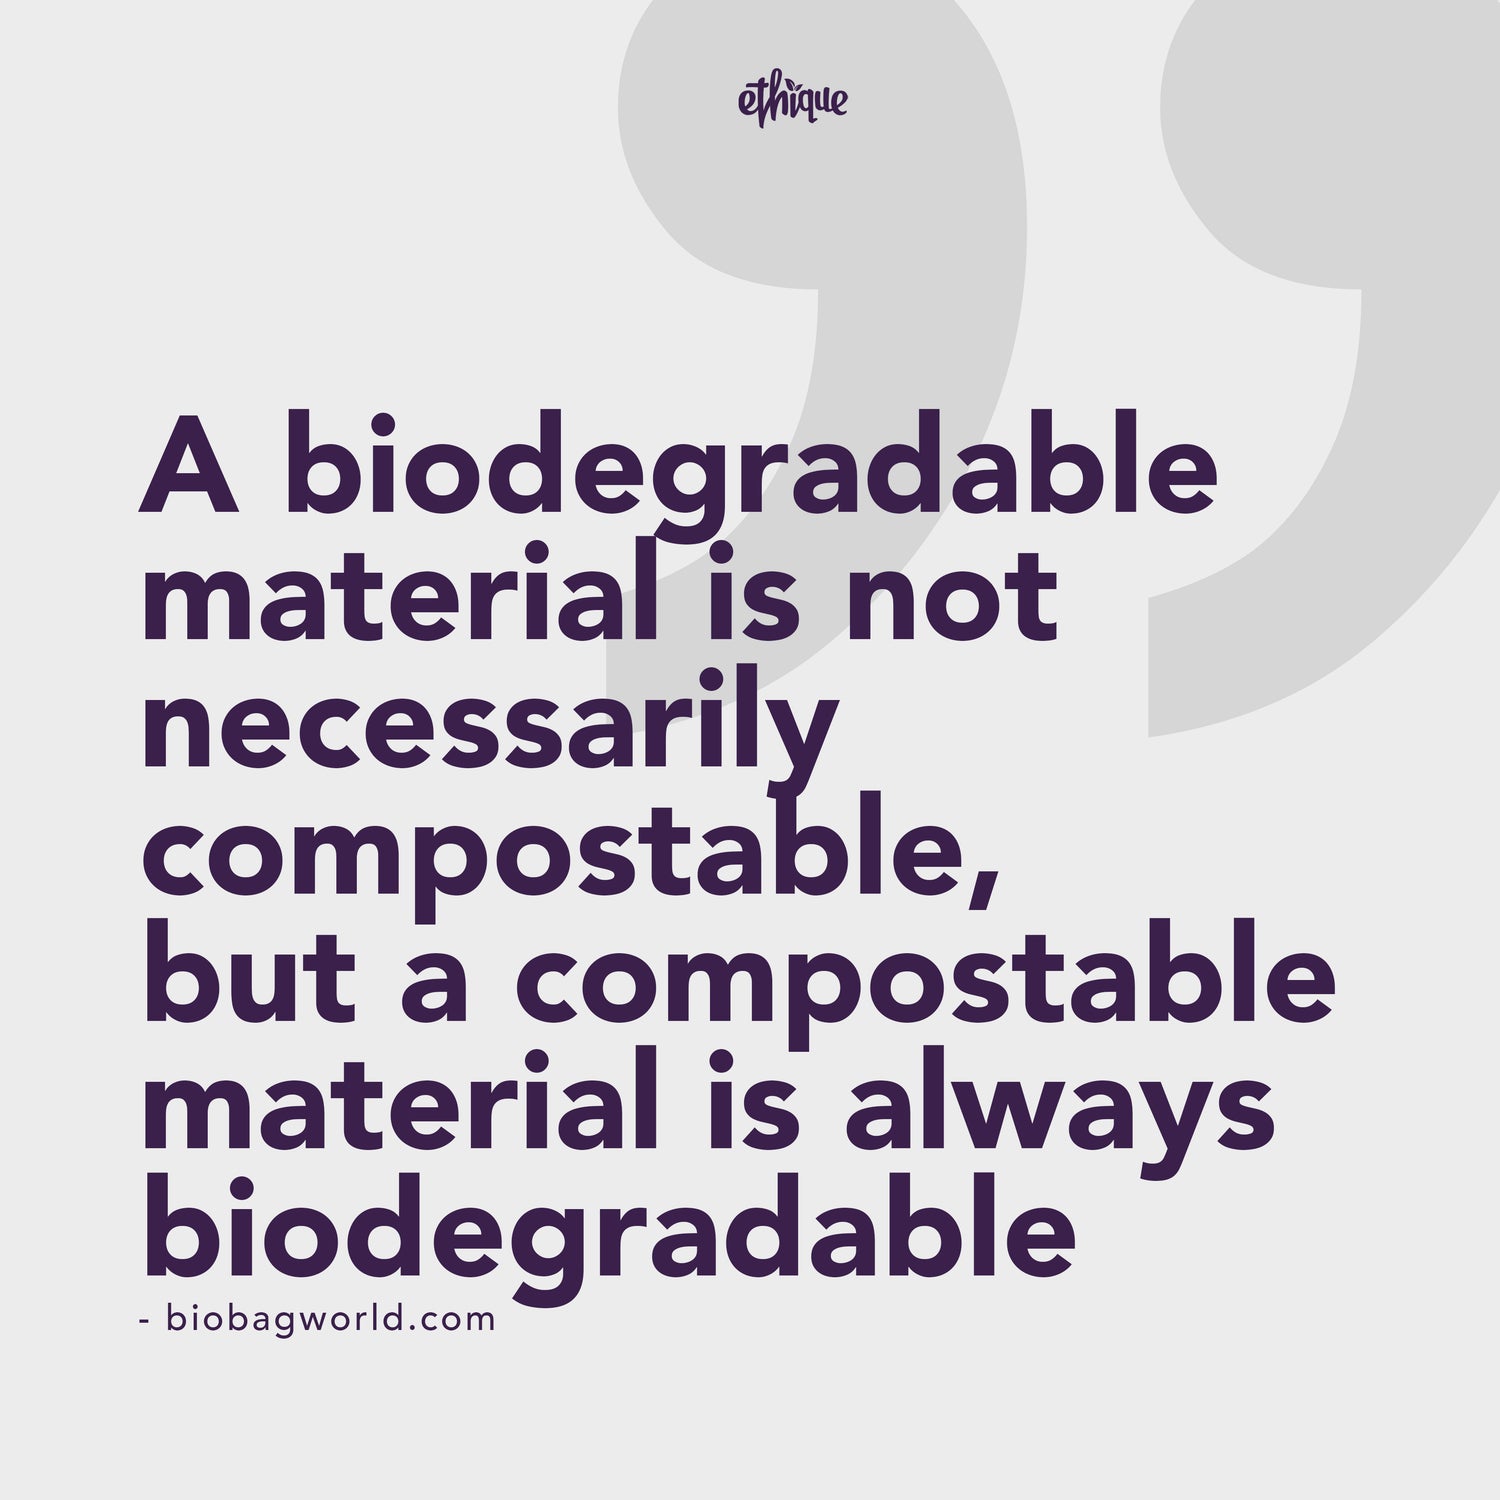 What is the difference between biodegradable and compostable?